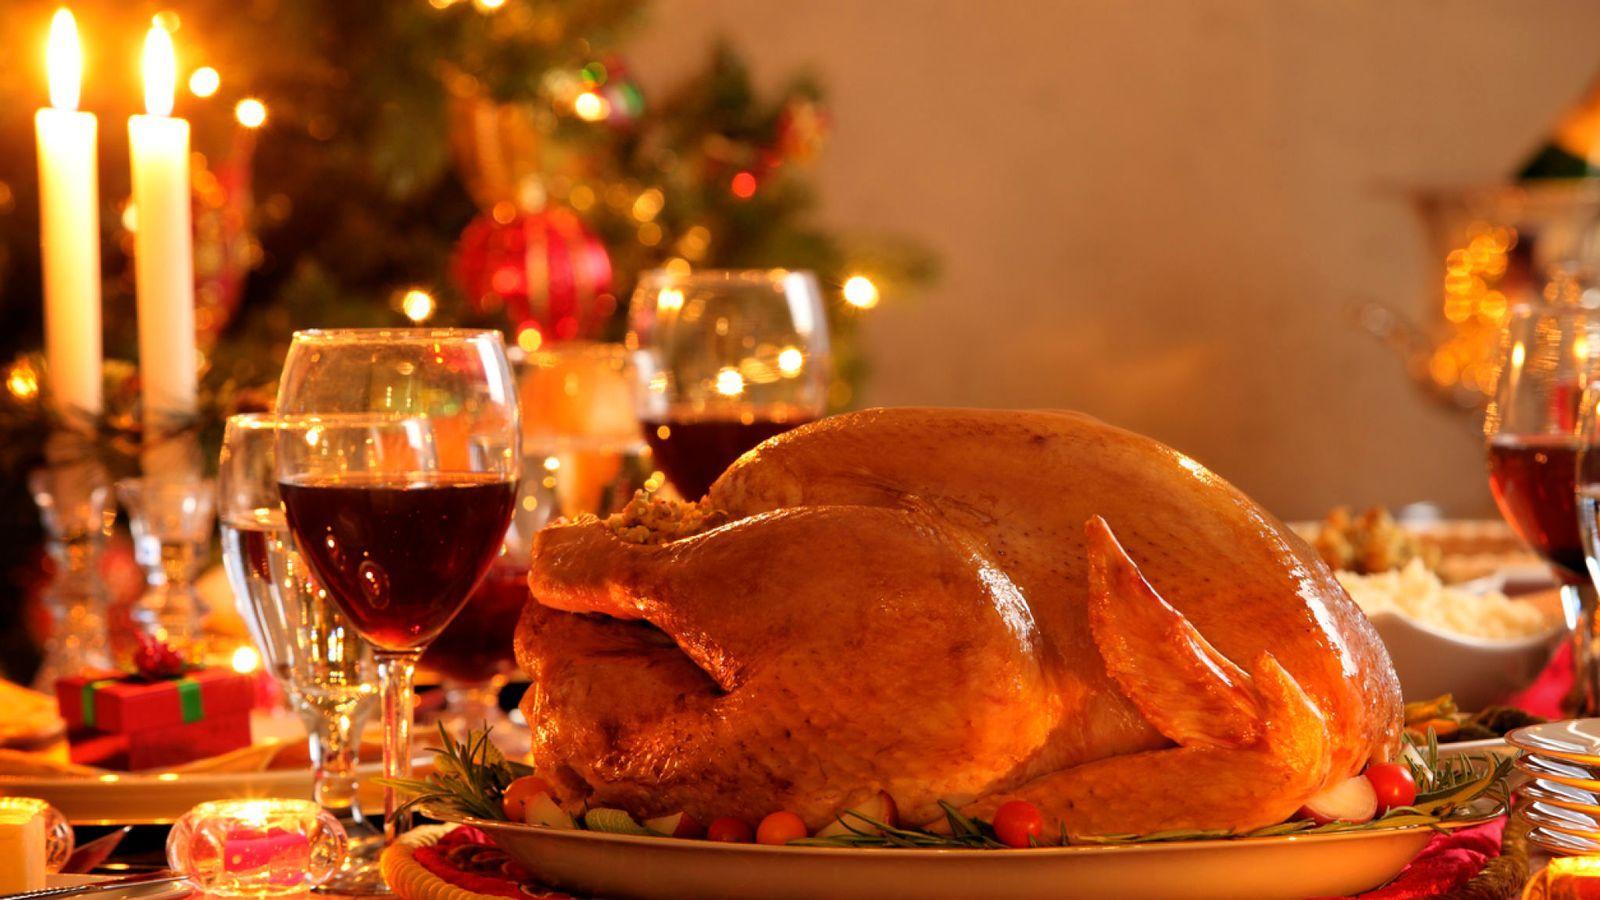 How the traditional Christmas dinner is becoming unfashionable